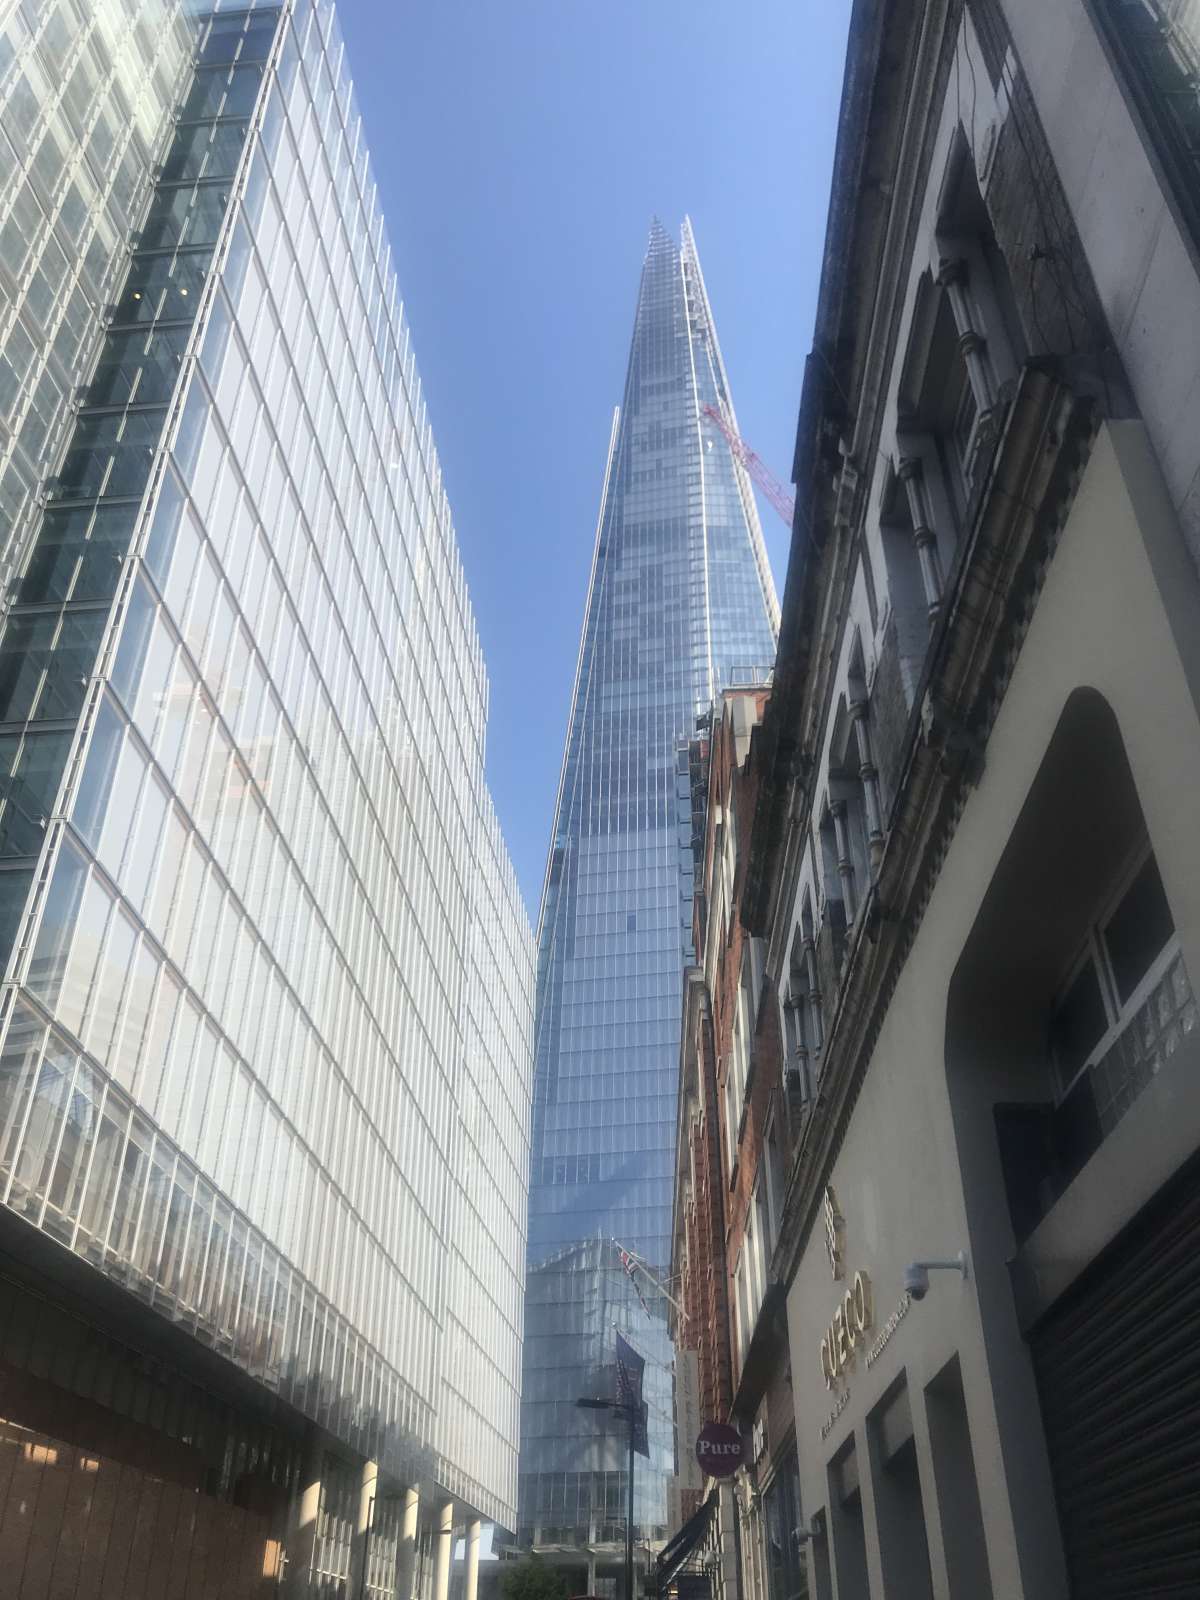 Great views of the Shard as you walk to Vinegar Yard